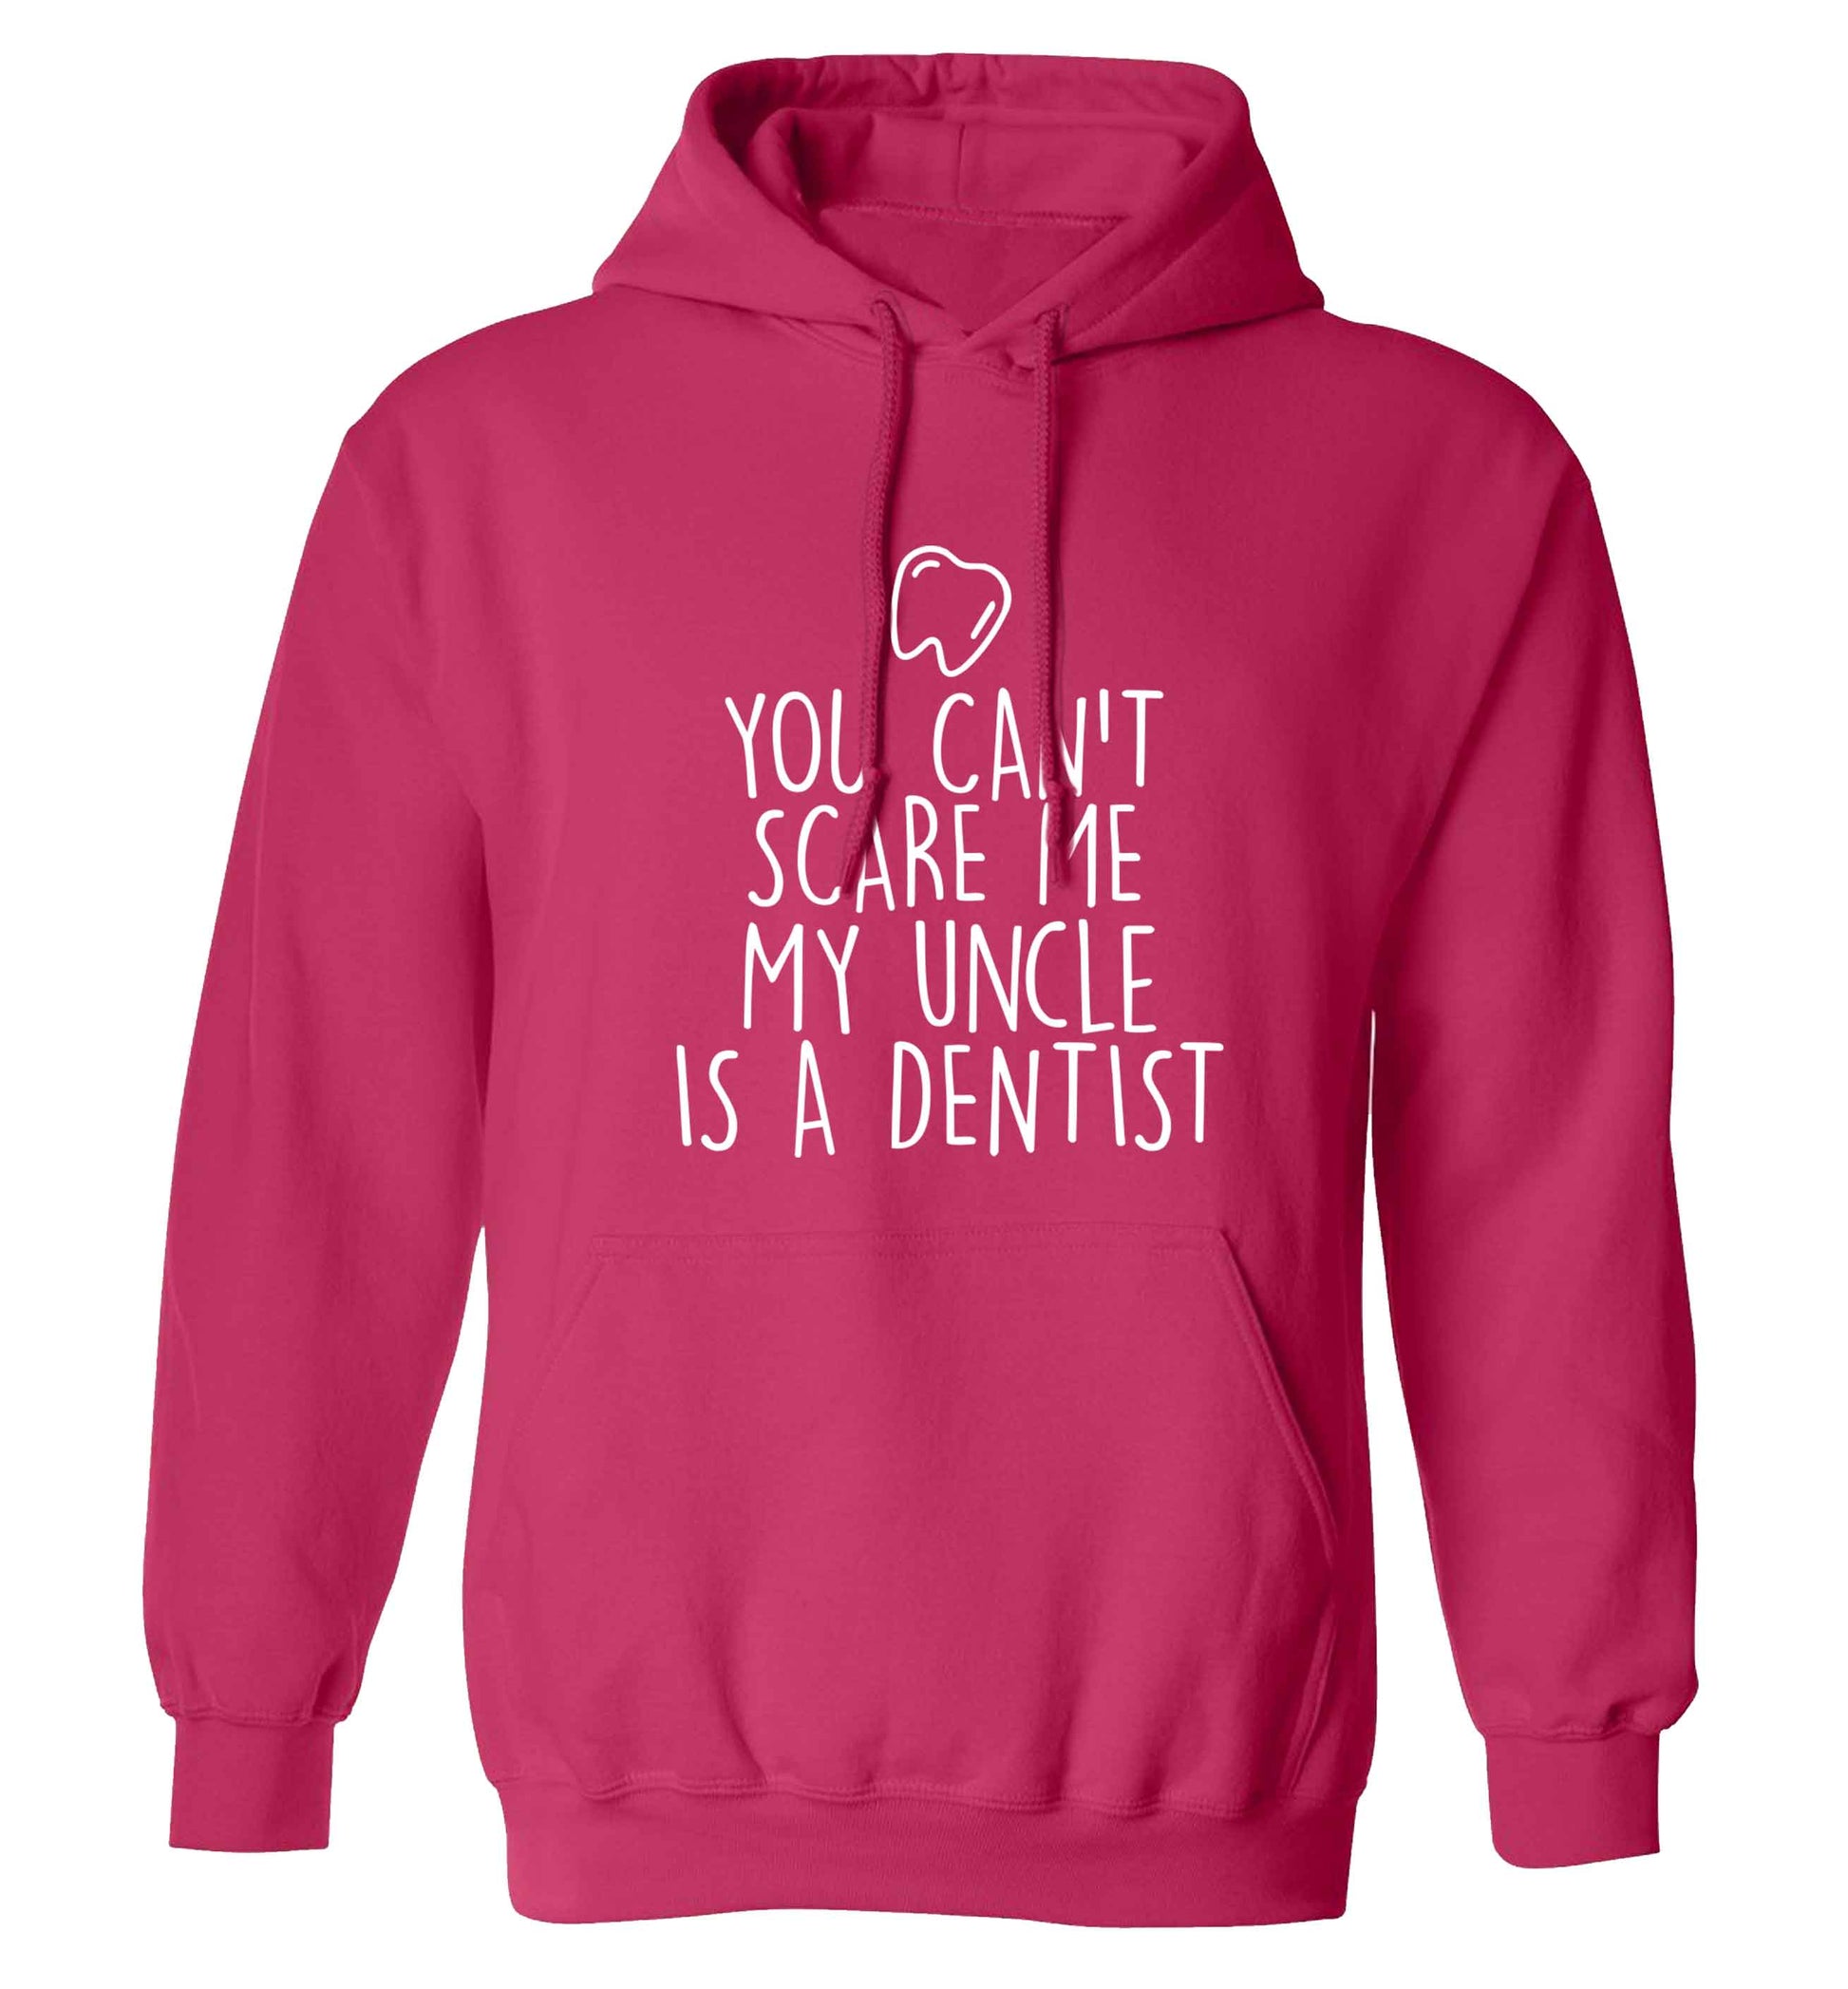 You can't scare me my uncle is a dentist adults unisex pink hoodie 2XL